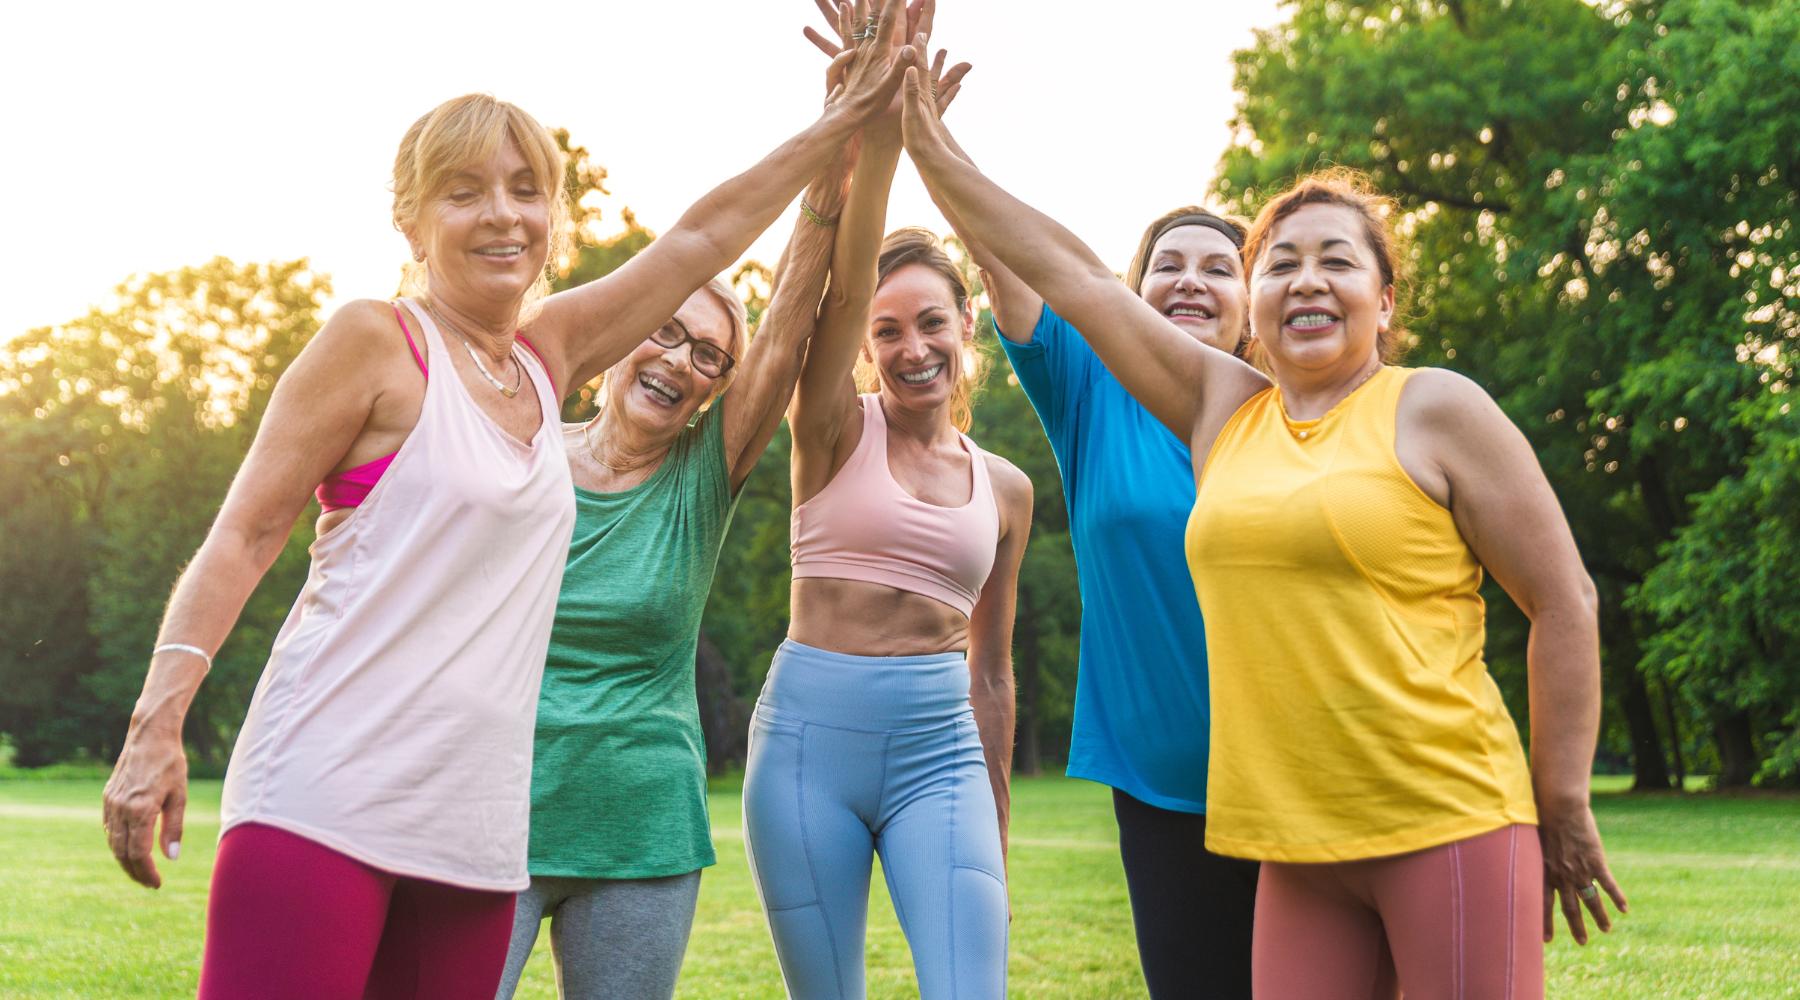 Group of older women in athletic clothes high fiving outdoors after a workout